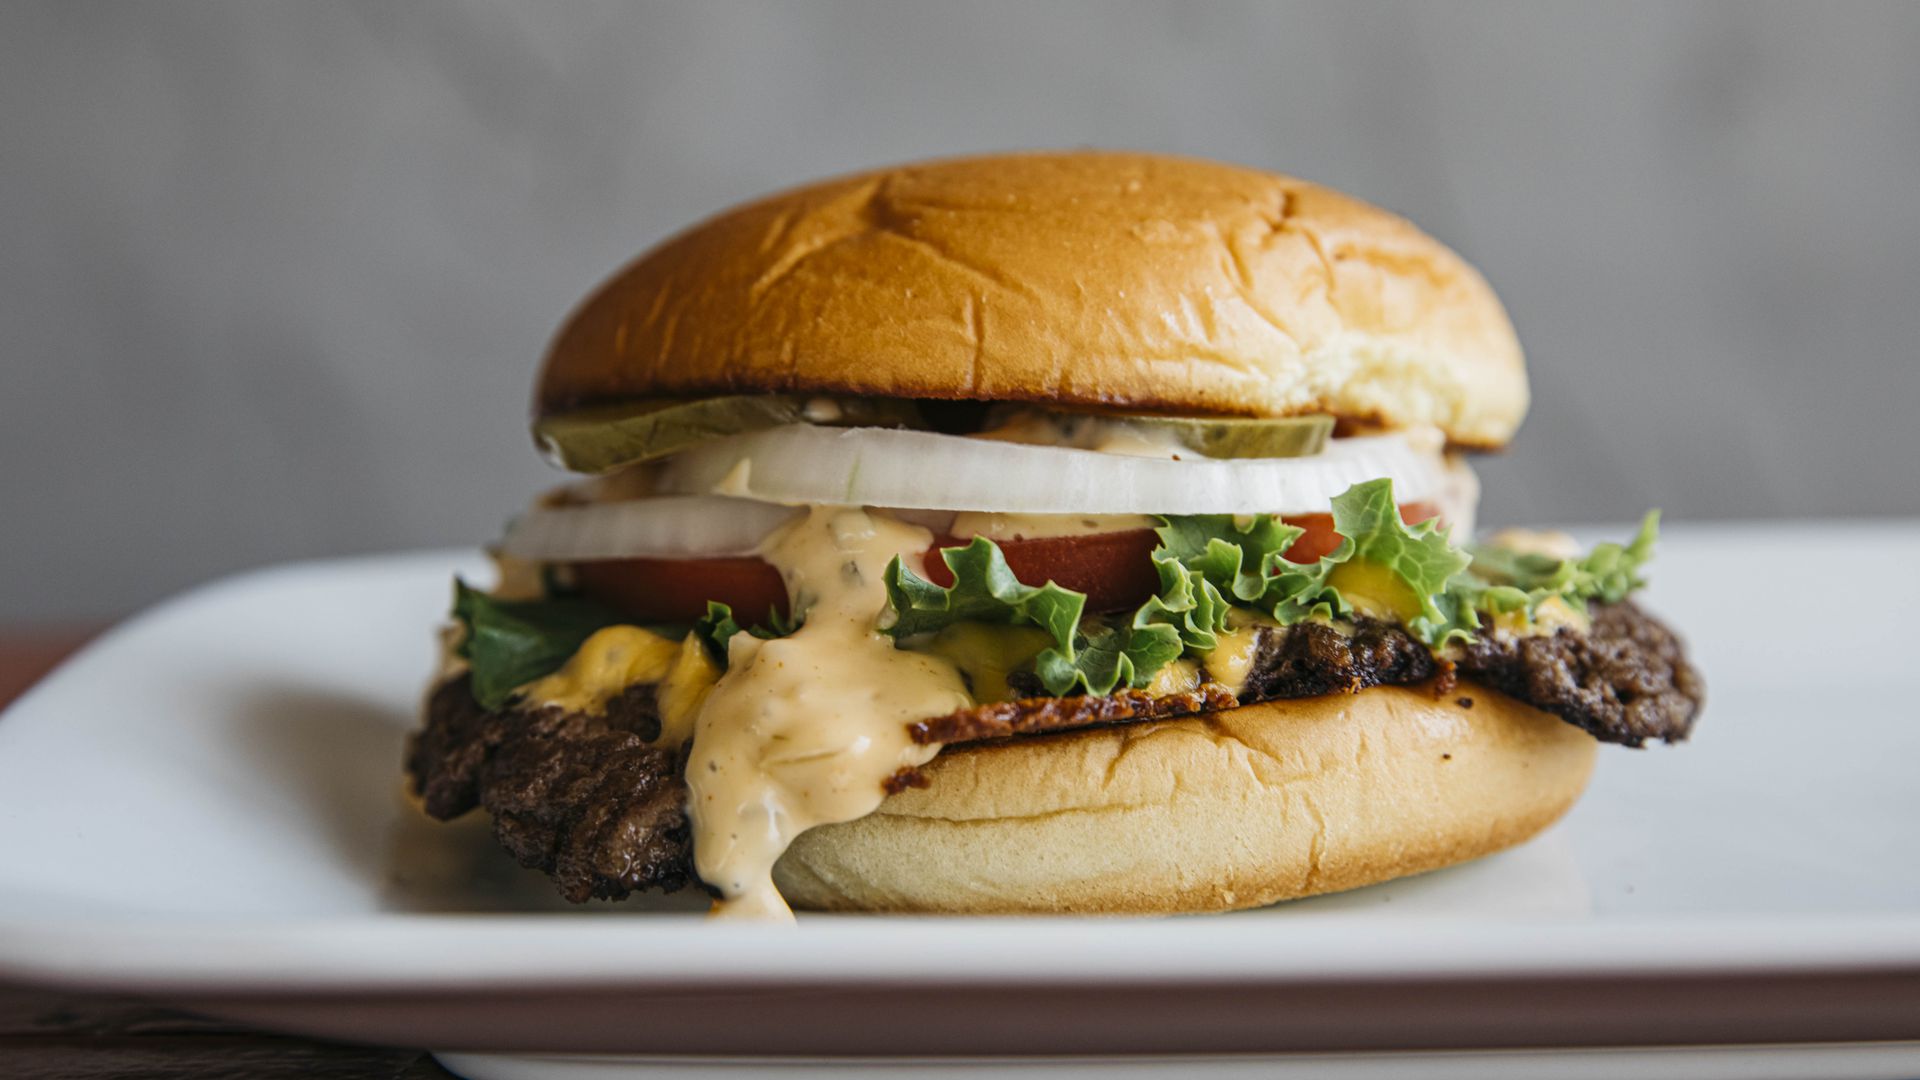 shane nasby to open second location of cledis burgers in bellevue